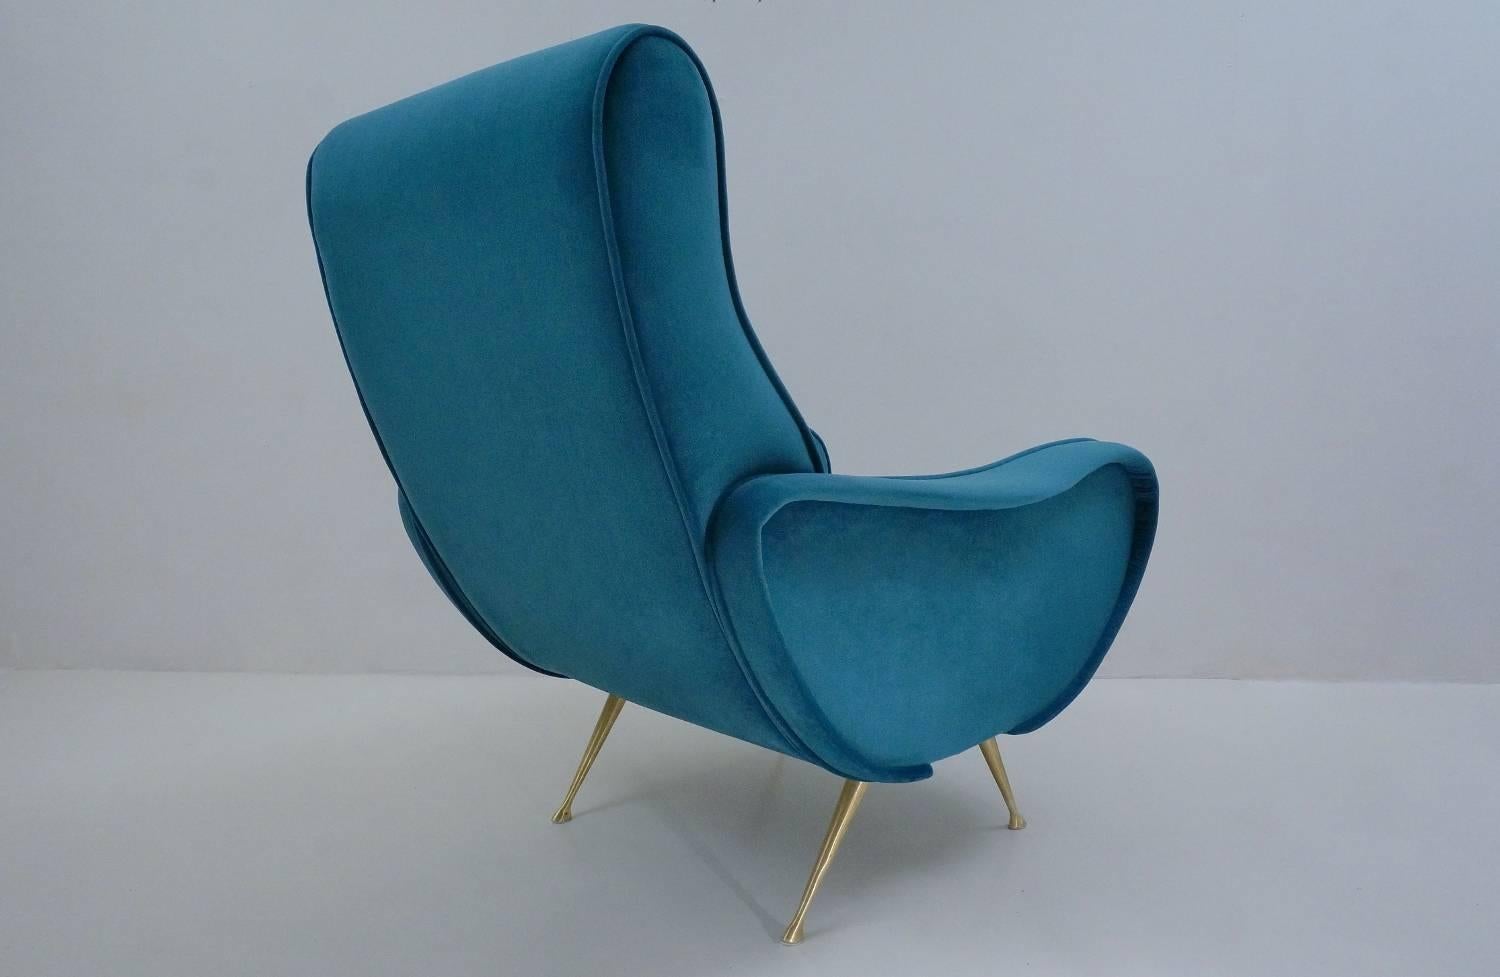 1950s Style Armchair Newly Made to Order in 25 Colors,  Italian In Excellent Condition For Sale In London, GB